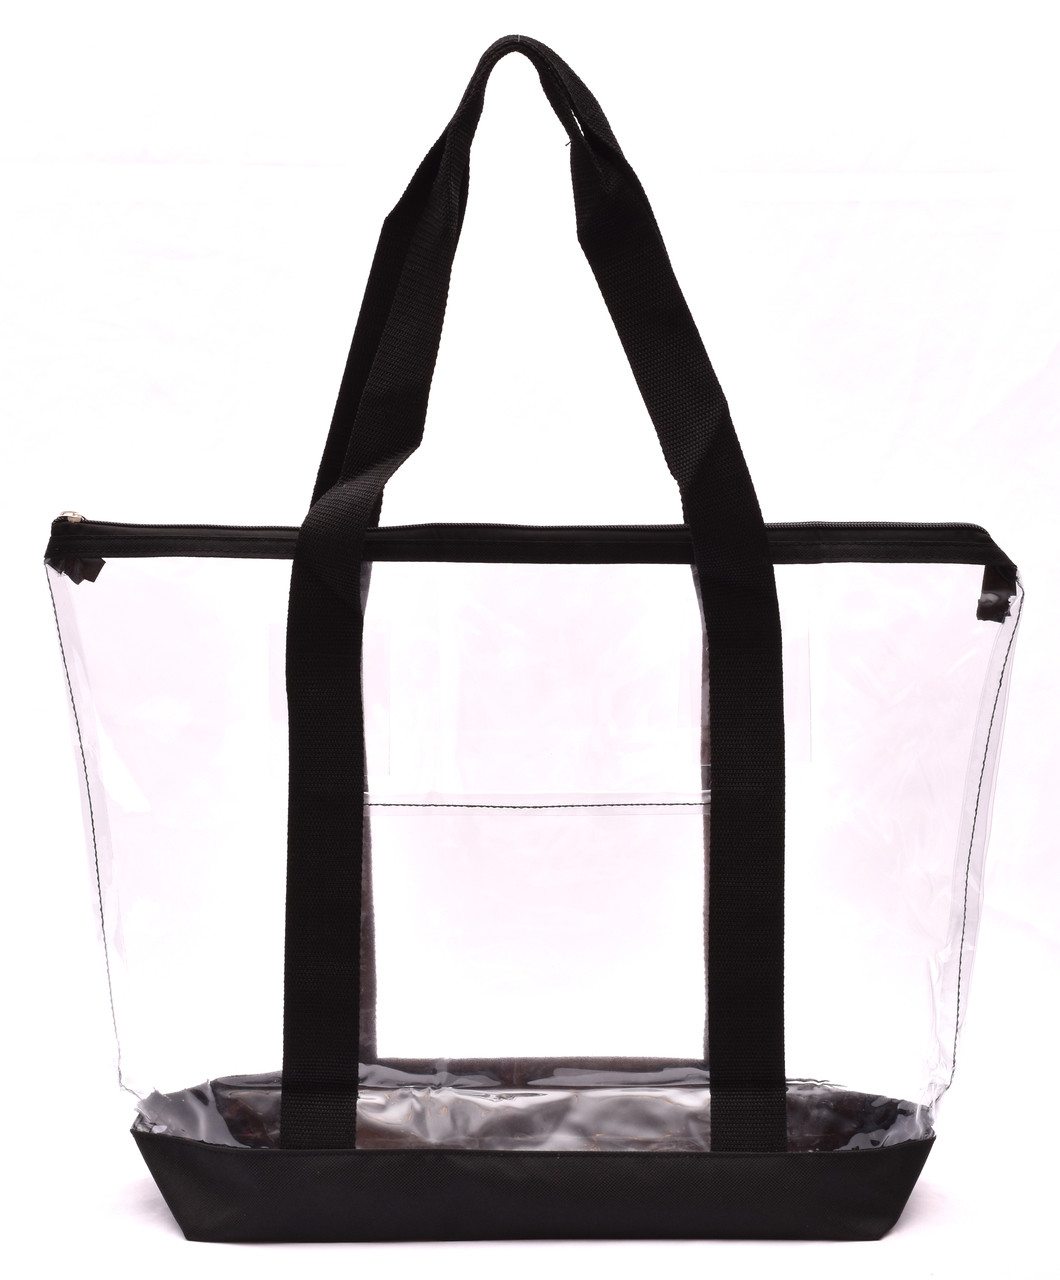 Clear Tote Bag Stadium Approved, Stadium Security Travel Gym Clear Bag,  Sports Games, Work, School Concerts